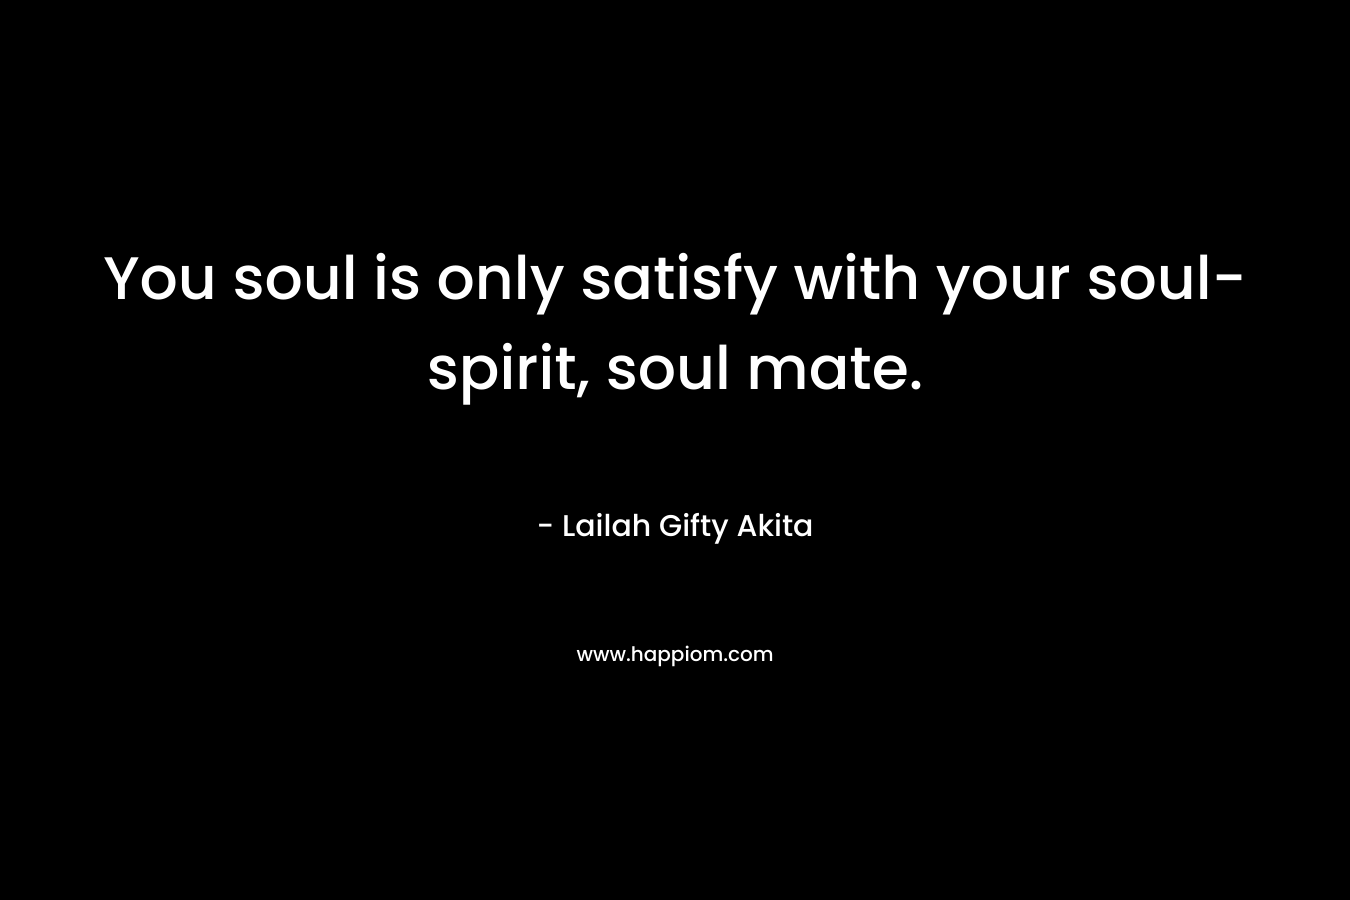 You soul is only satisfy with your soul-spirit, soul mate. – Lailah Gifty Akita